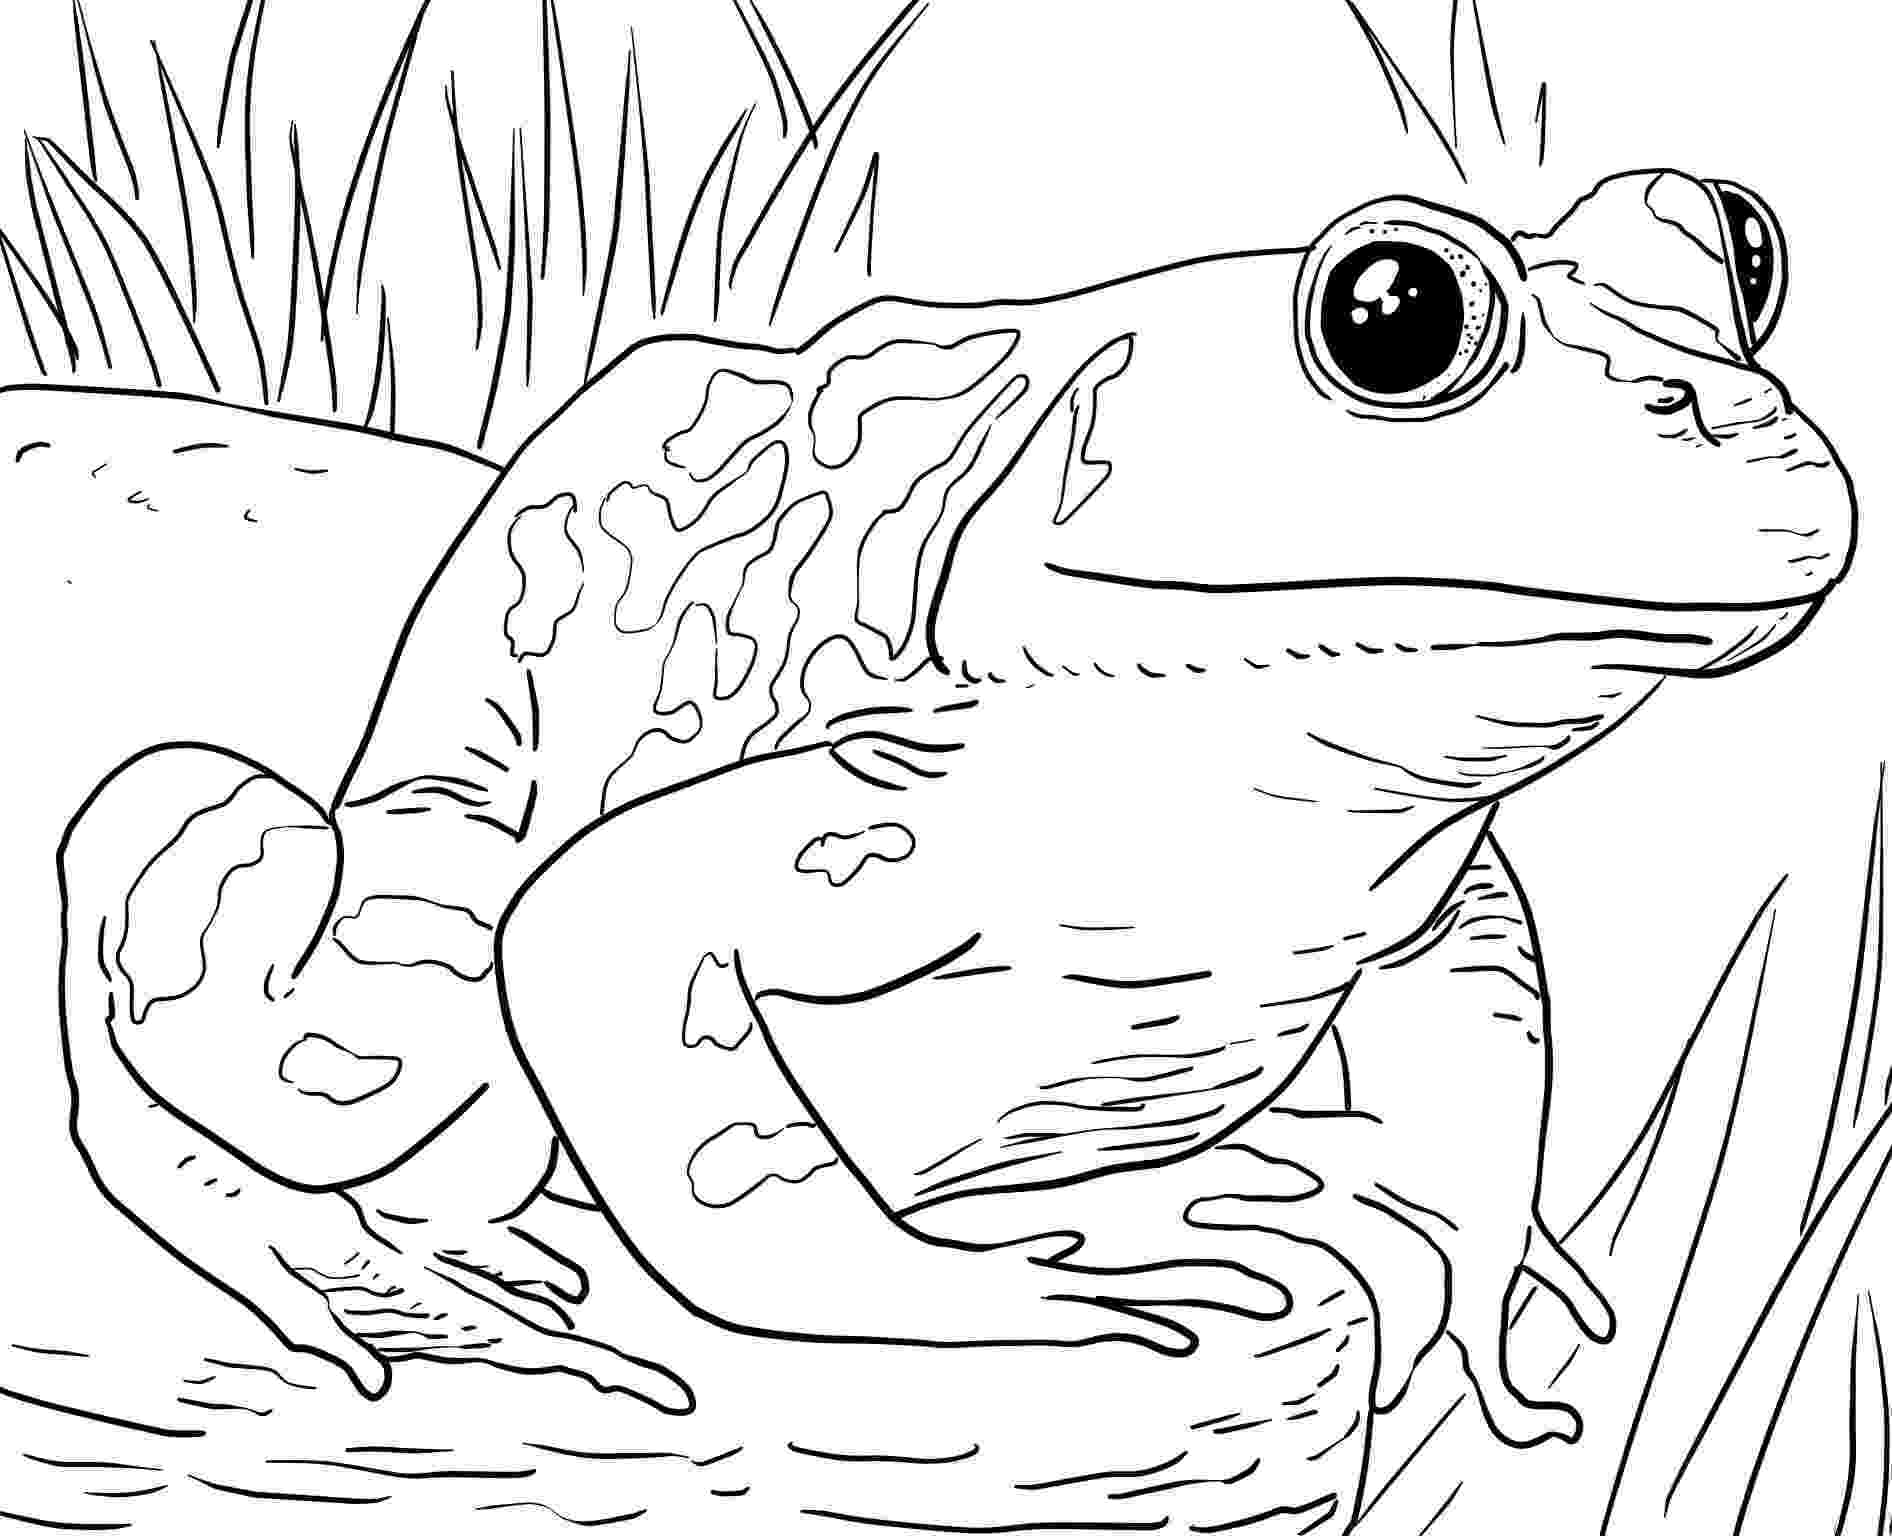 coloring picture zoo zoo keeper coloring page zoo coloring pages coloring zoo picture coloring 